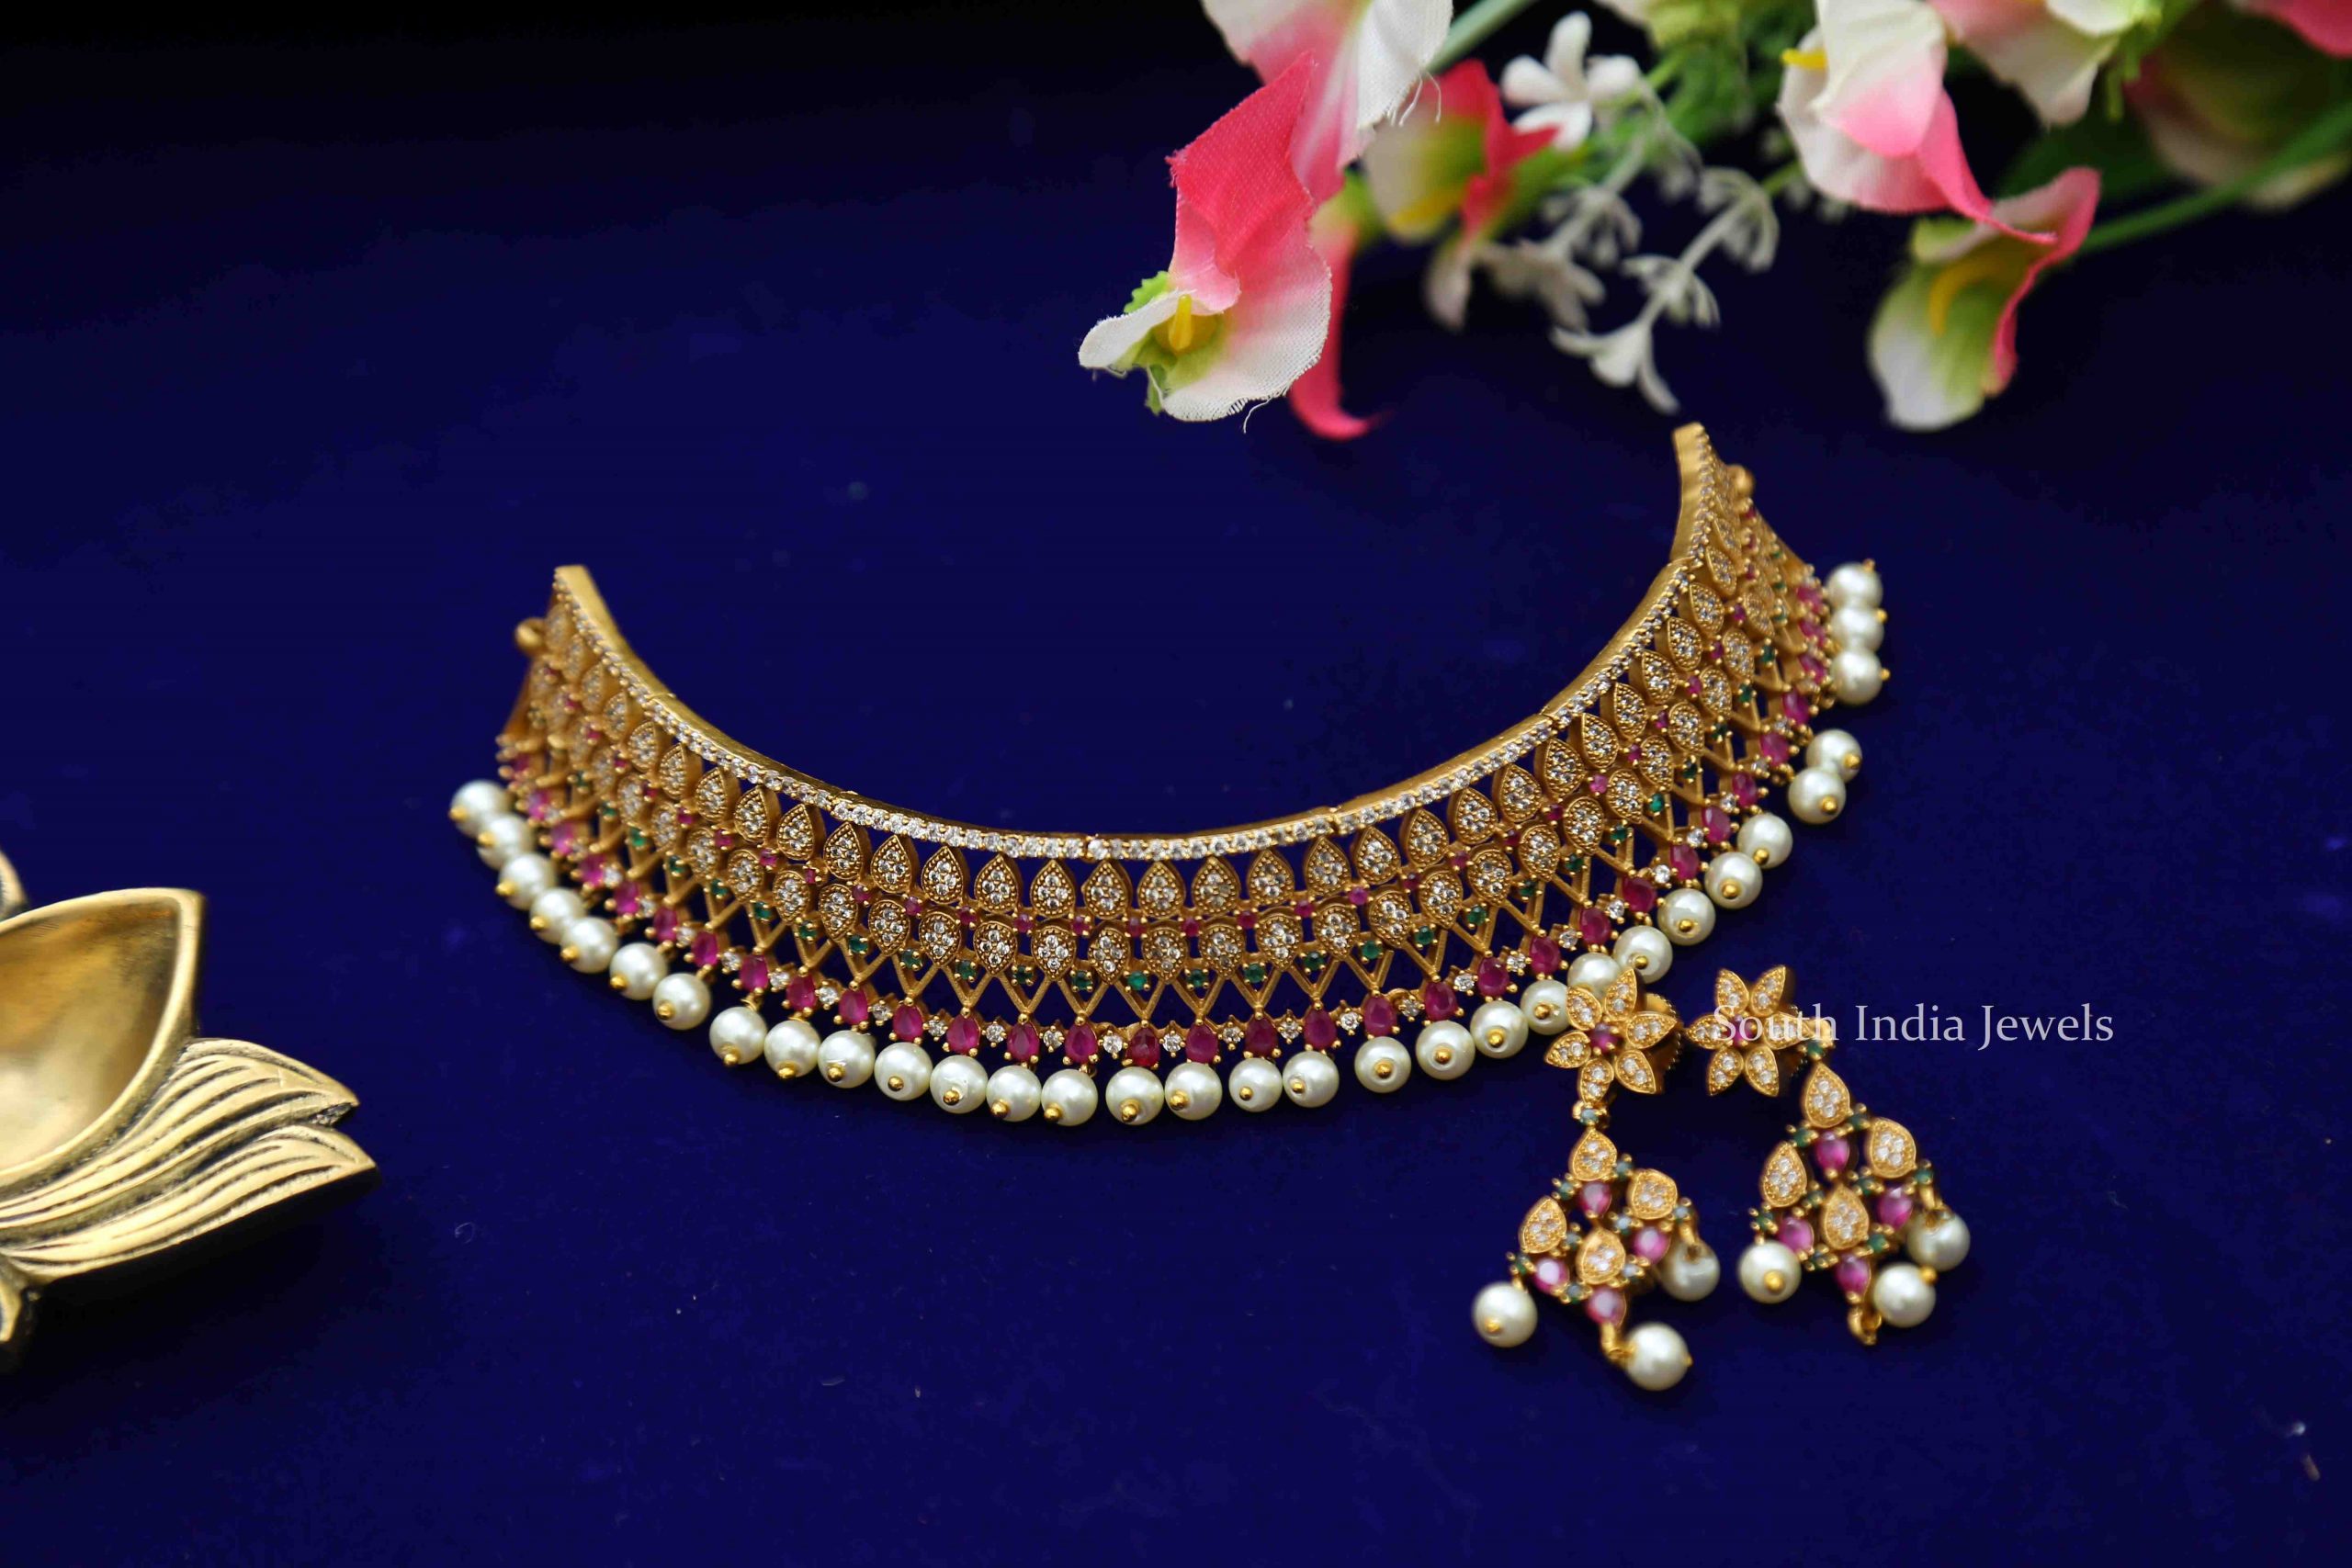 Stunning Multi Stone Choker and Earrings - South India Jewels